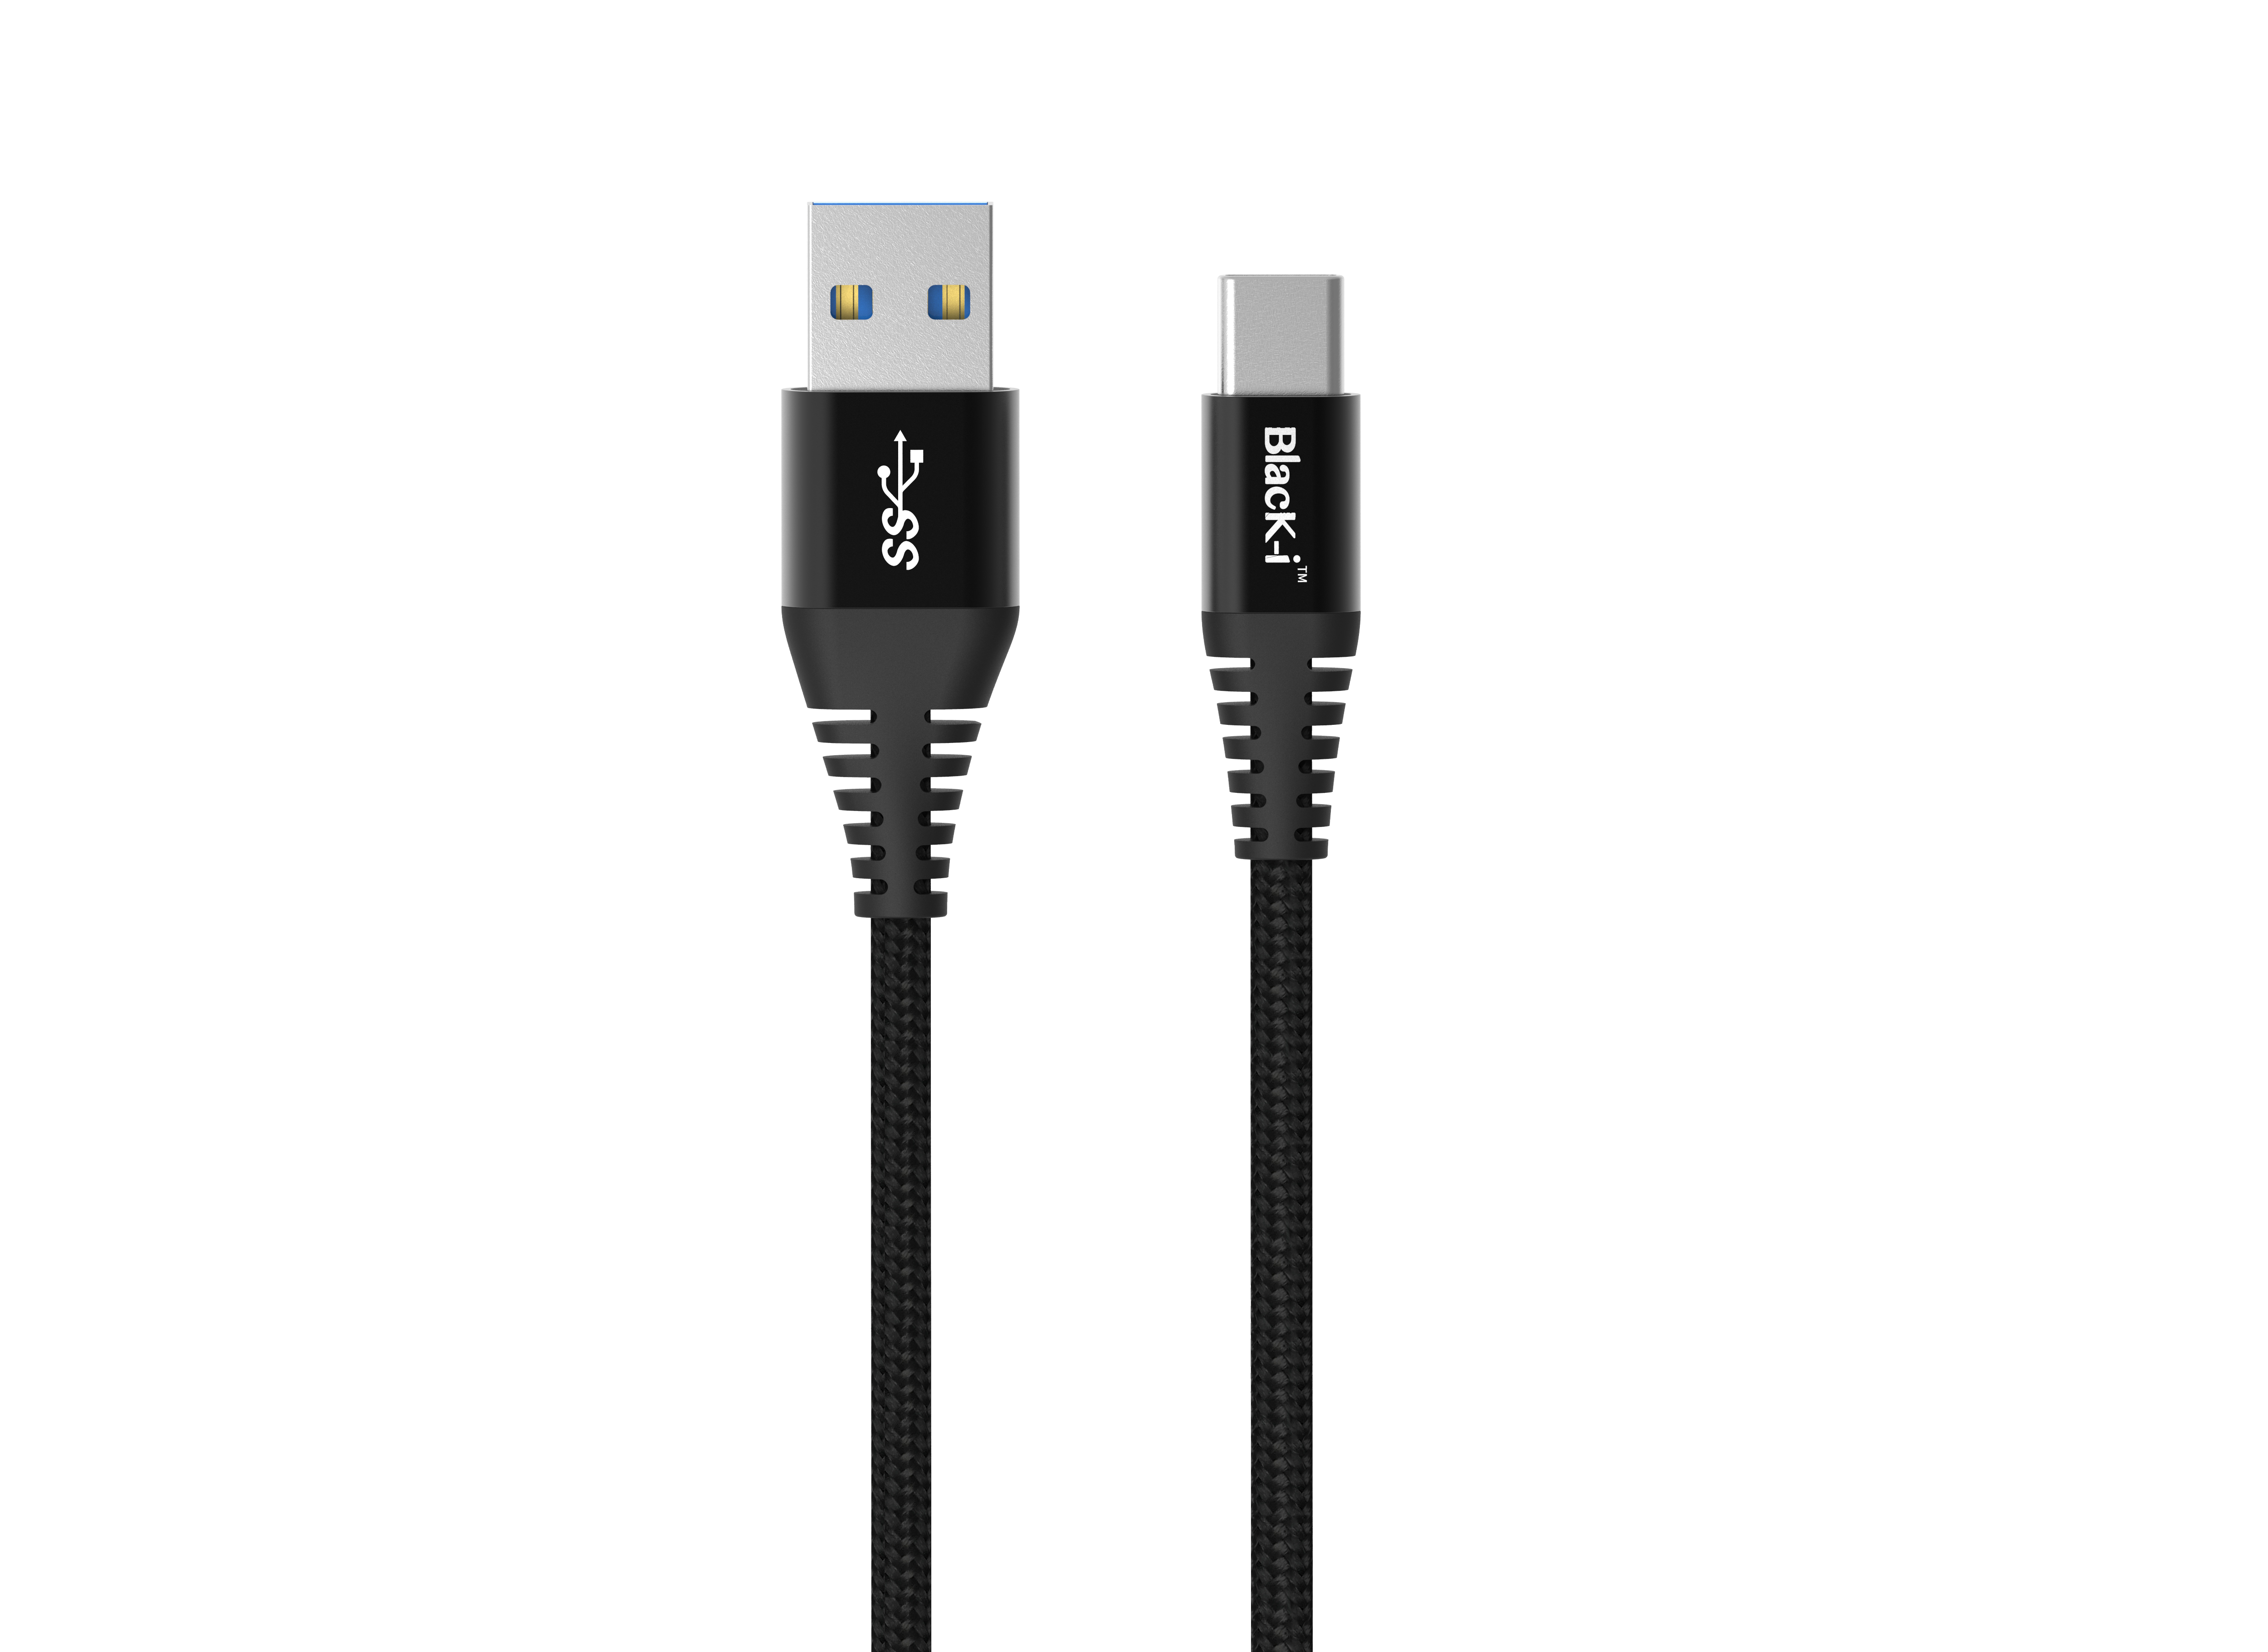 Black-i USB 3.0 to USB-C Cable 2 Meter